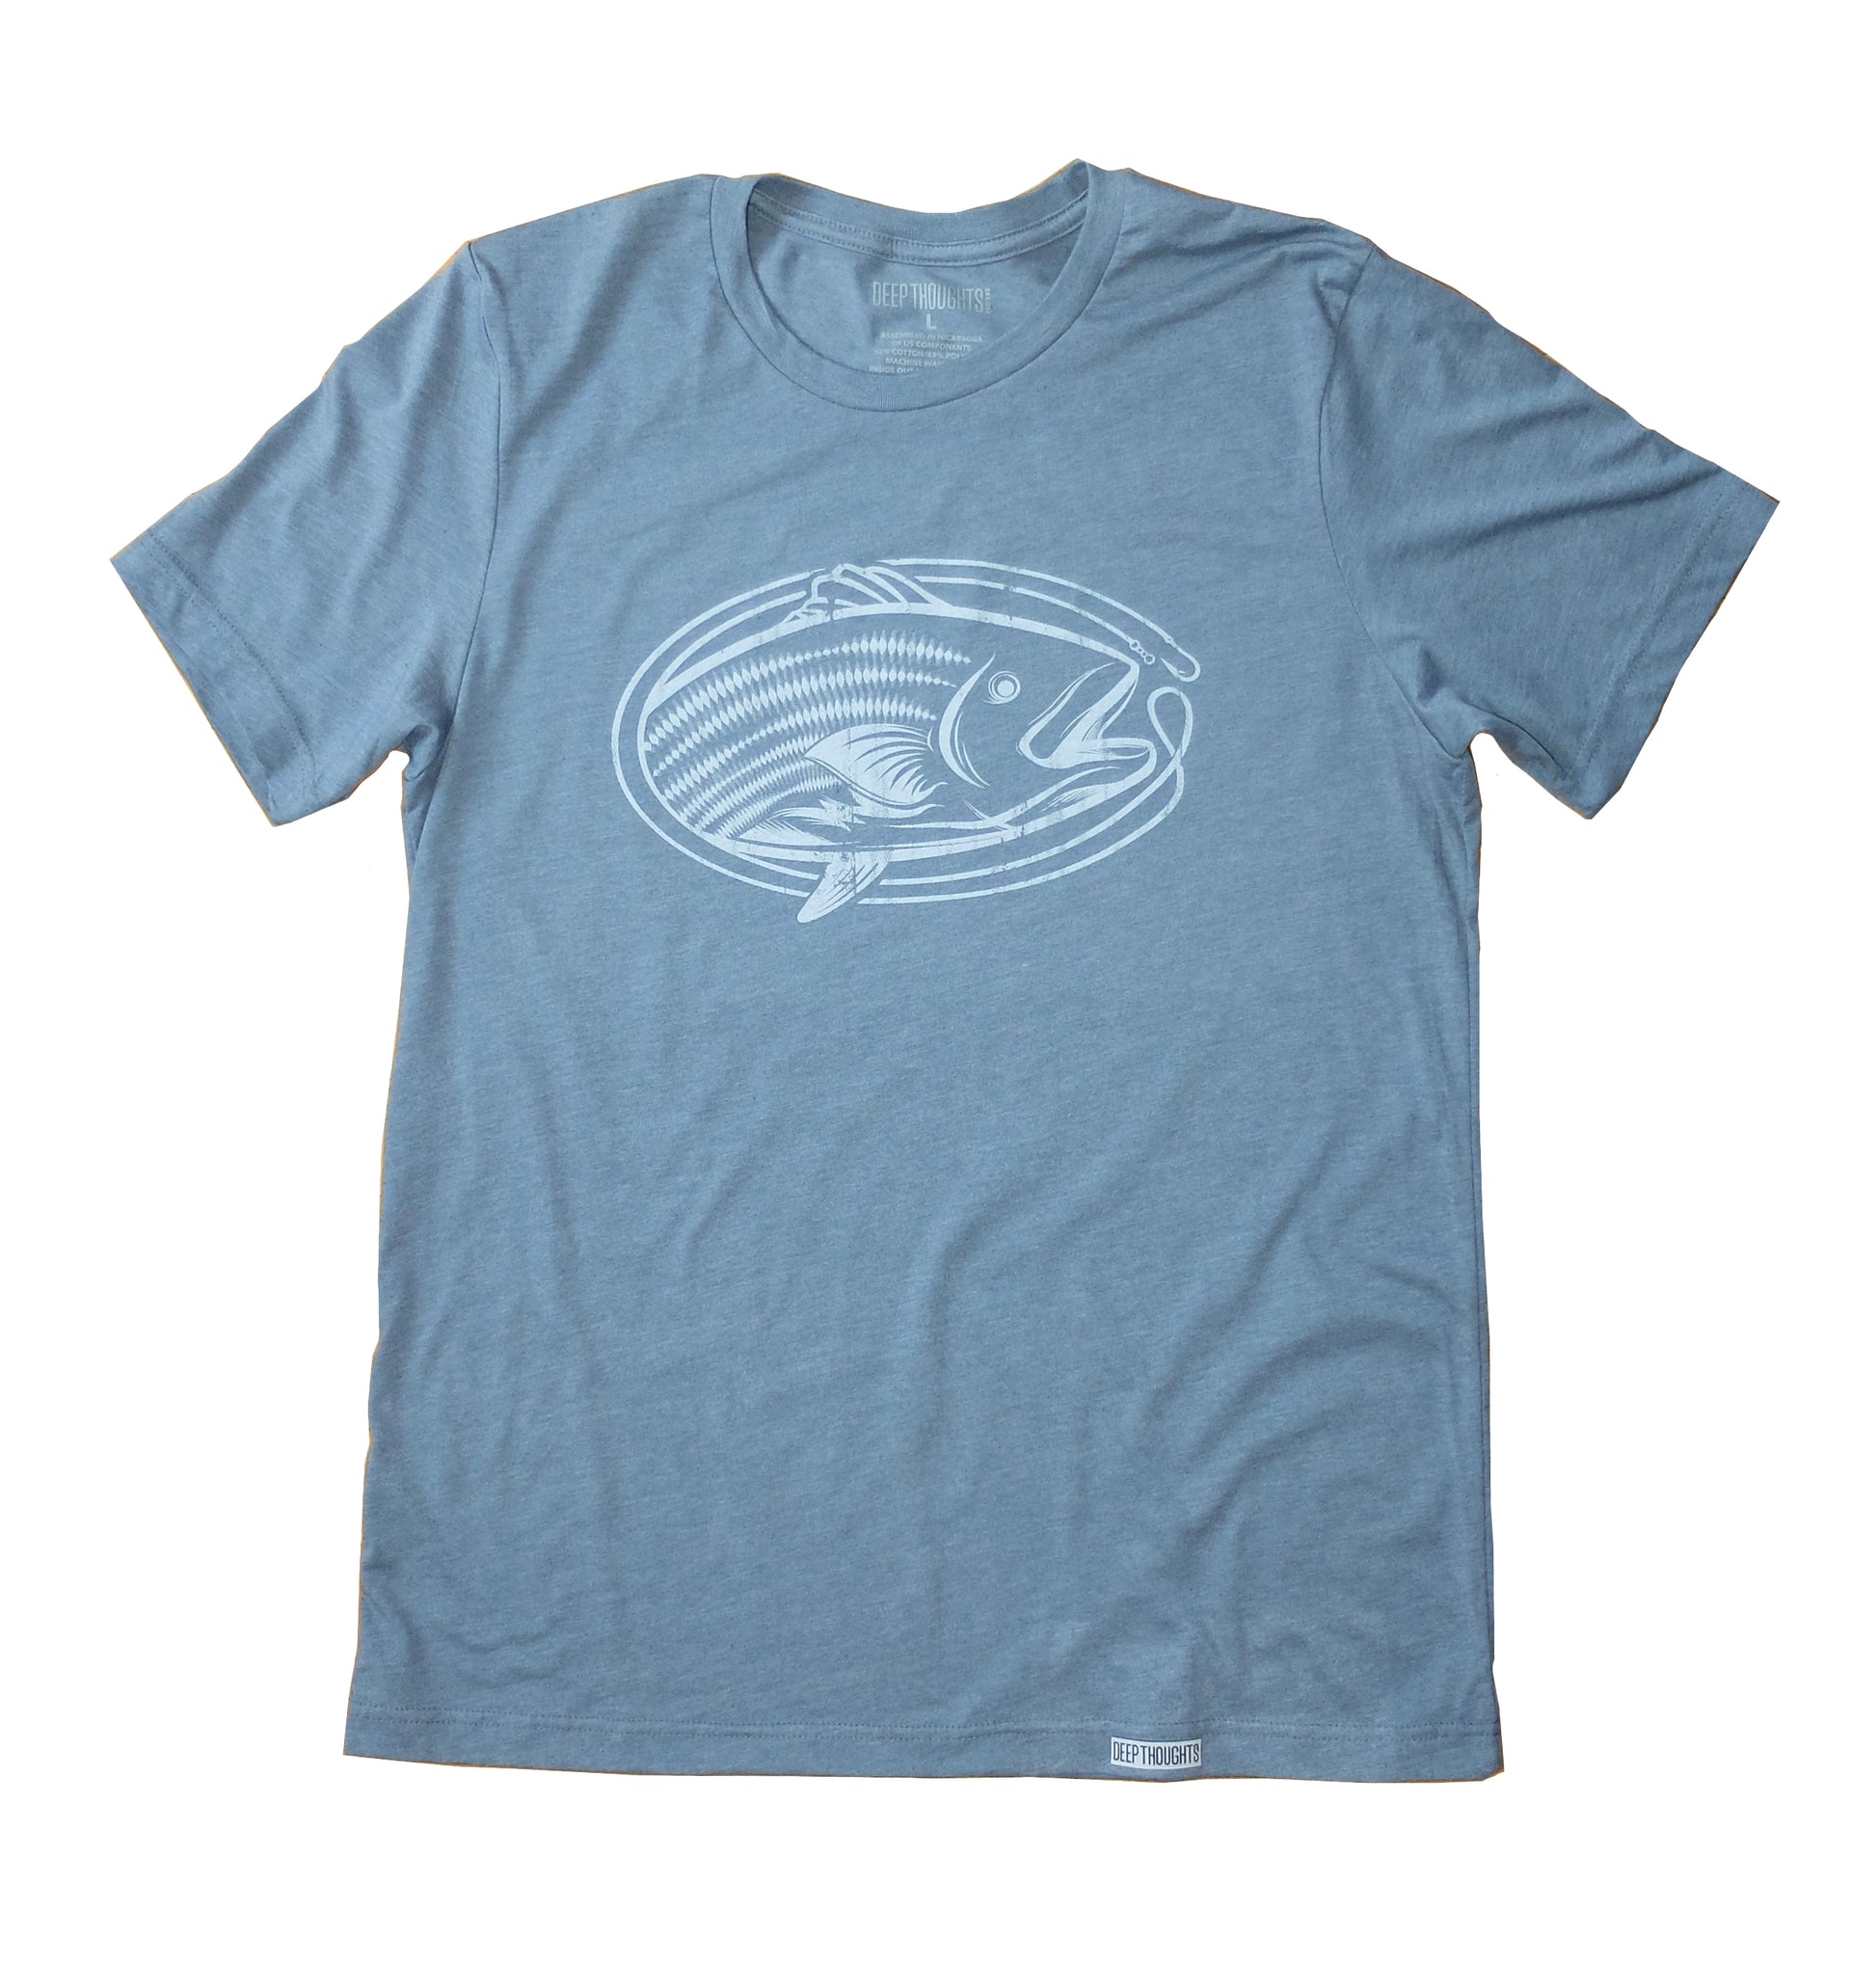 heather slate blue t-shirt with white oval-shaped striped bass fishing graphic